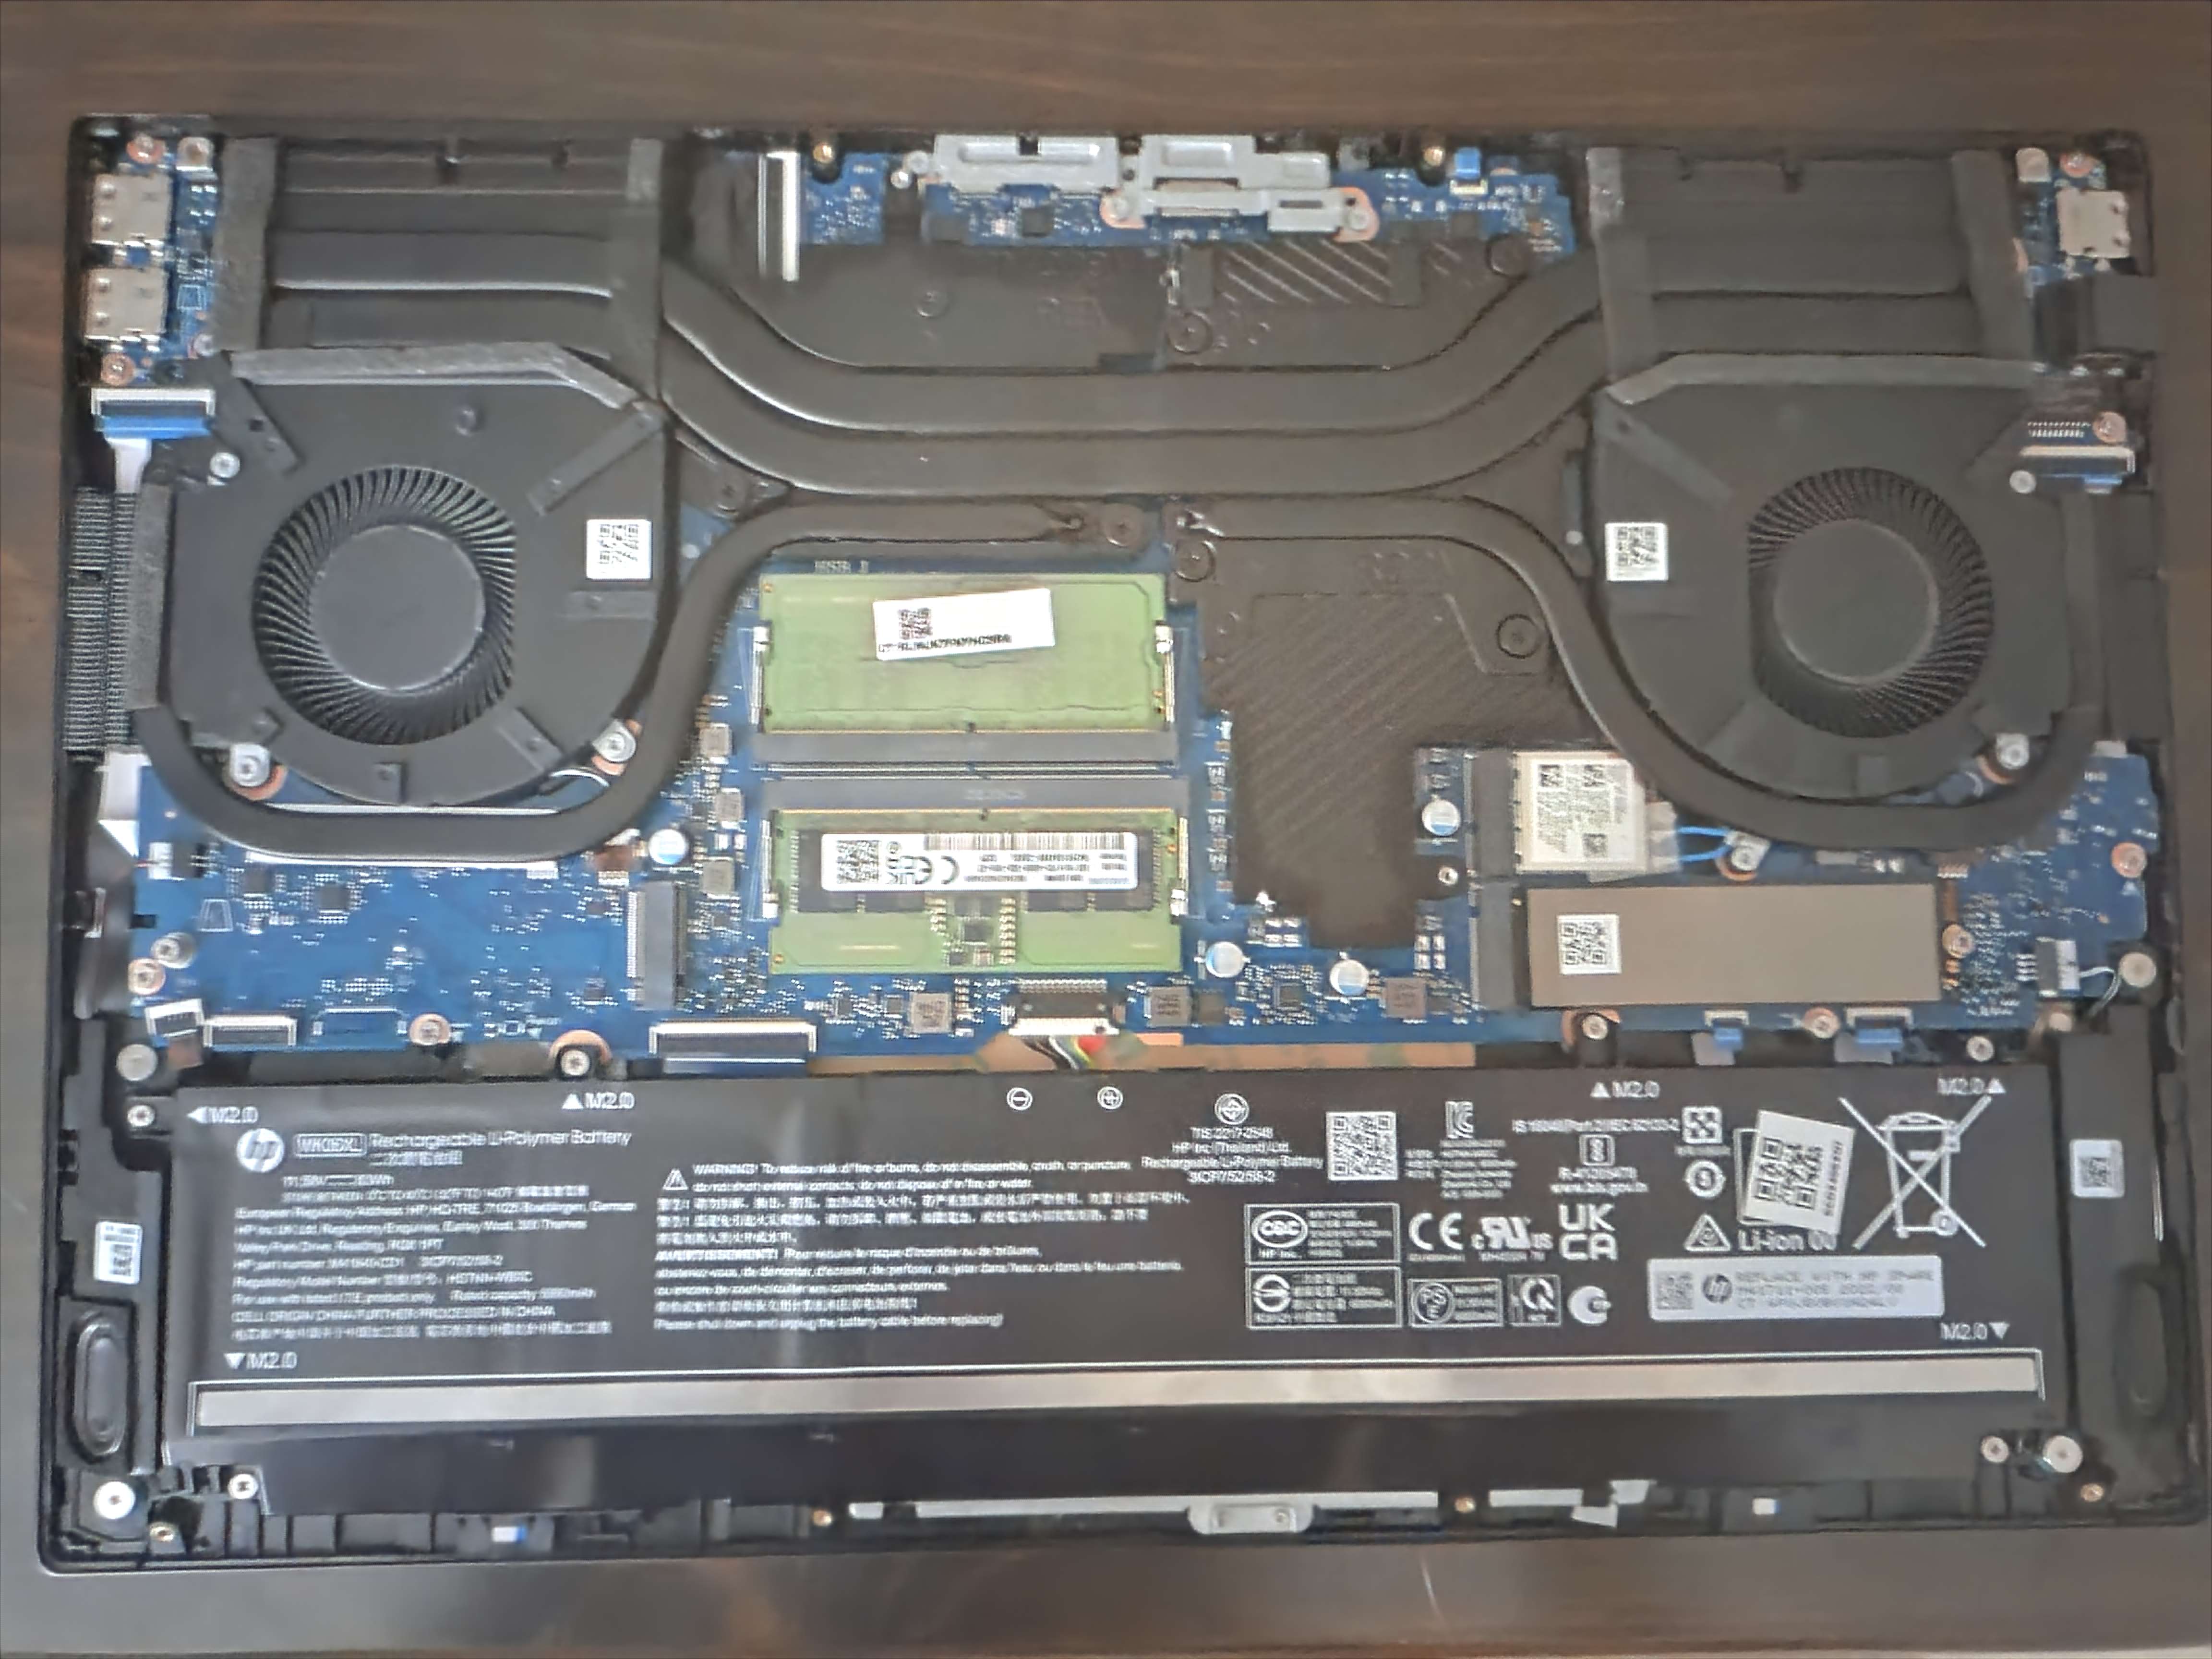 The inside of the laptop with the backplate removed